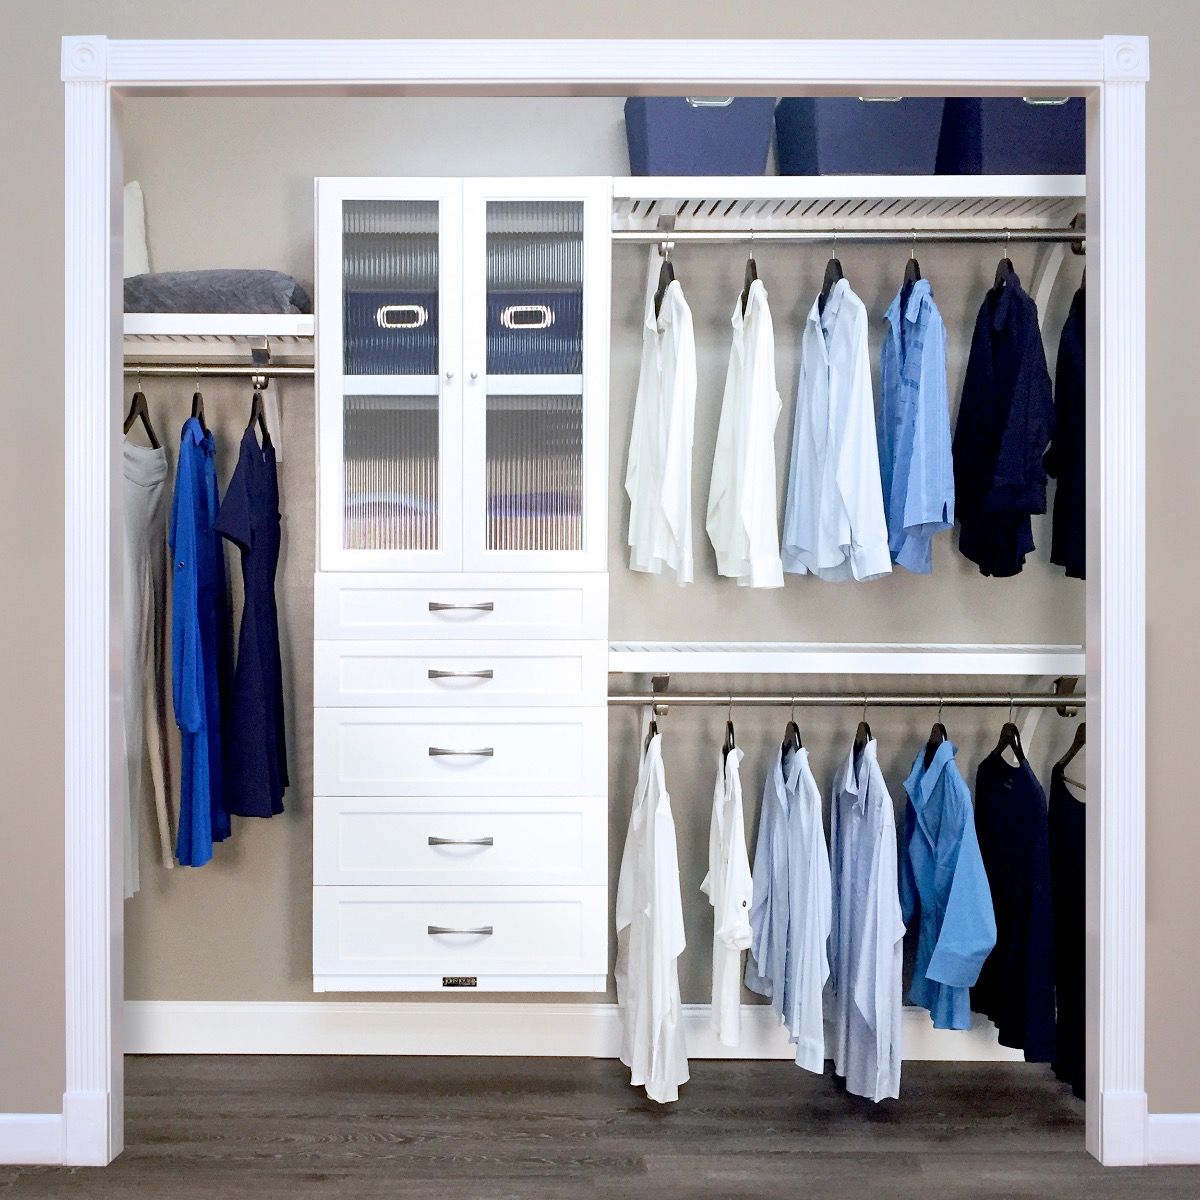 16in. Deep Woodcrest White Deluxe Closet Organizer with 5